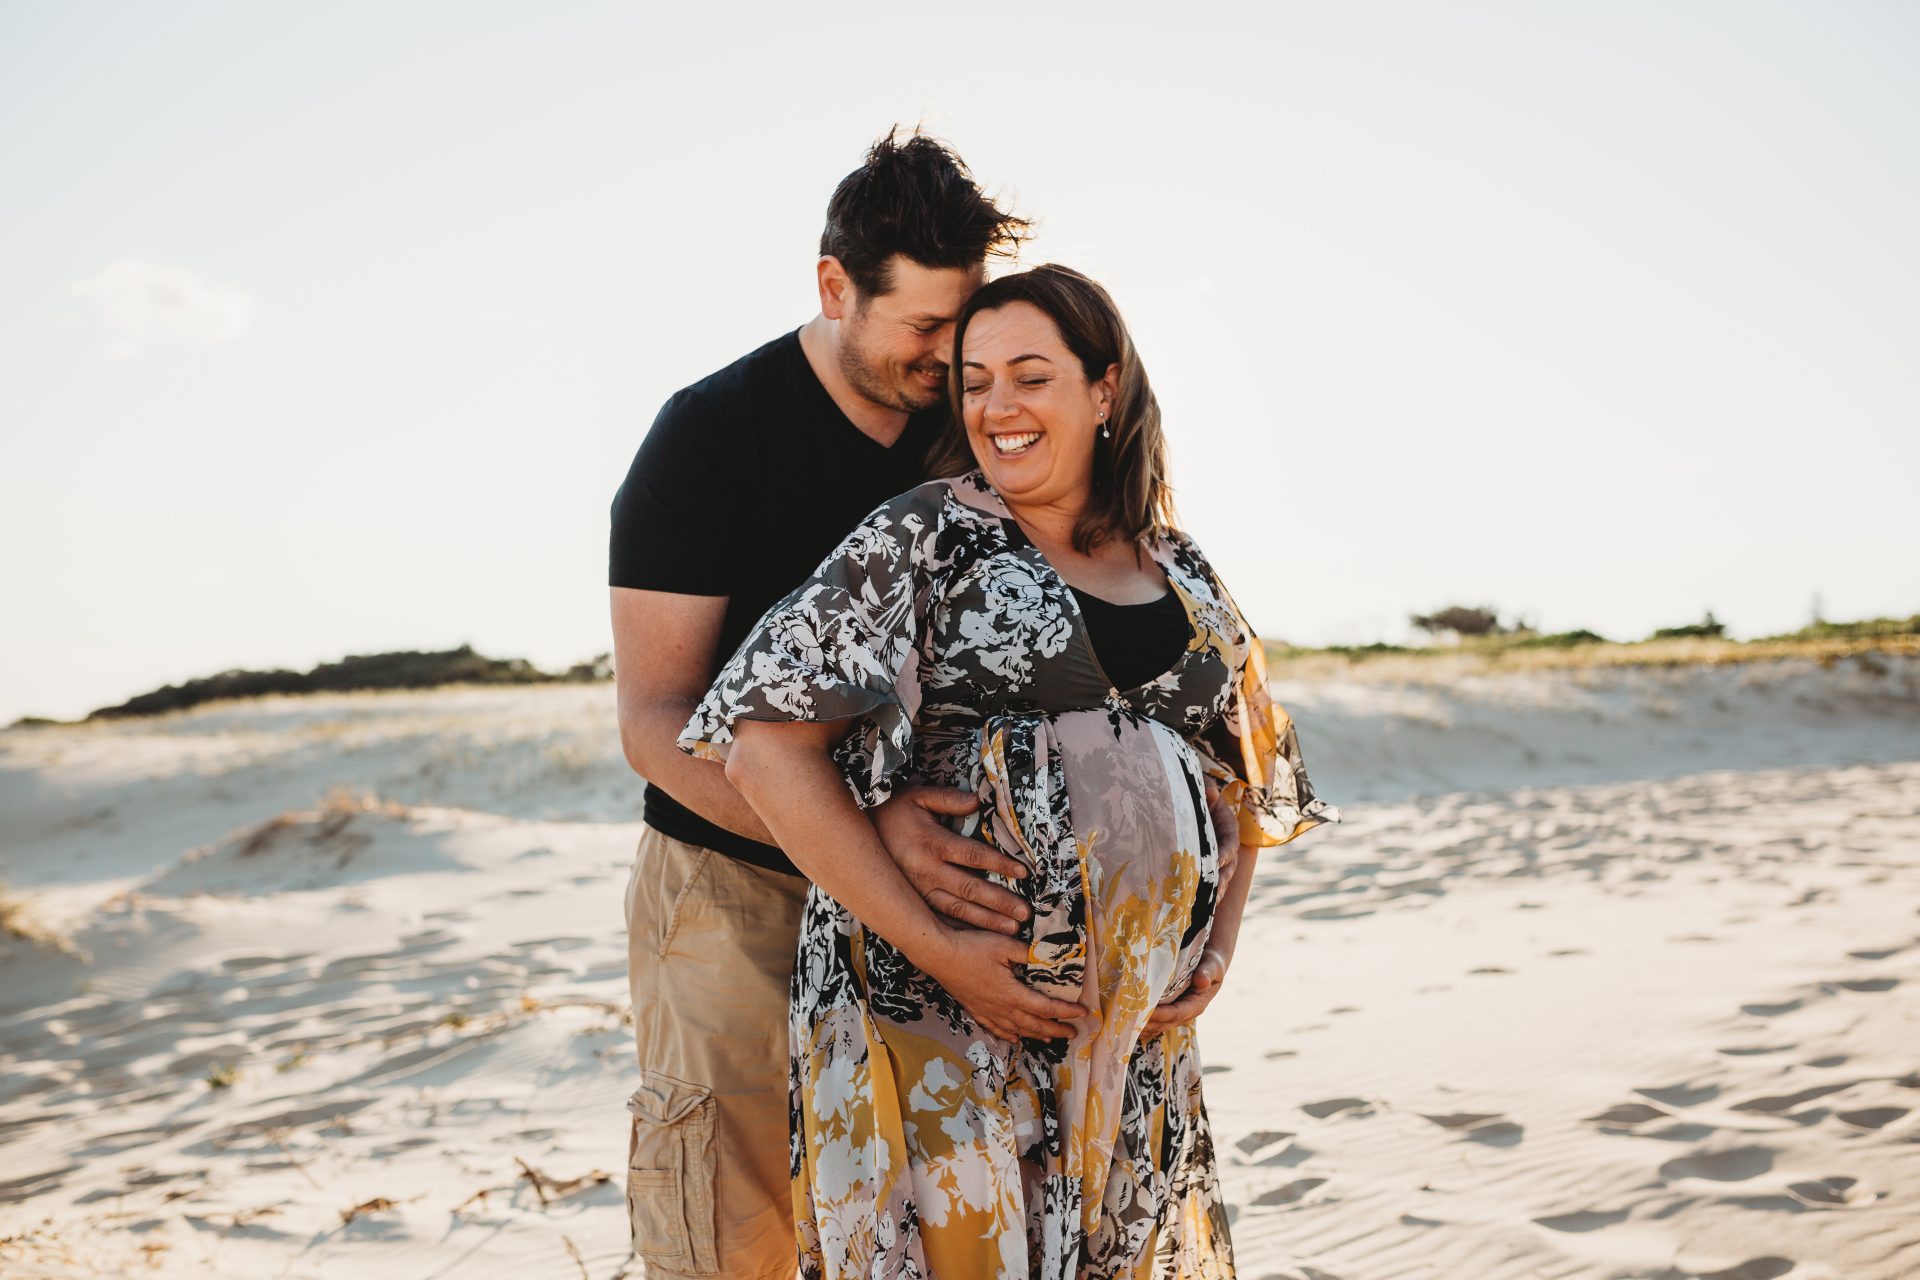 Pregnant woman standing in front of her husband smiling, as he cuddles her from behind